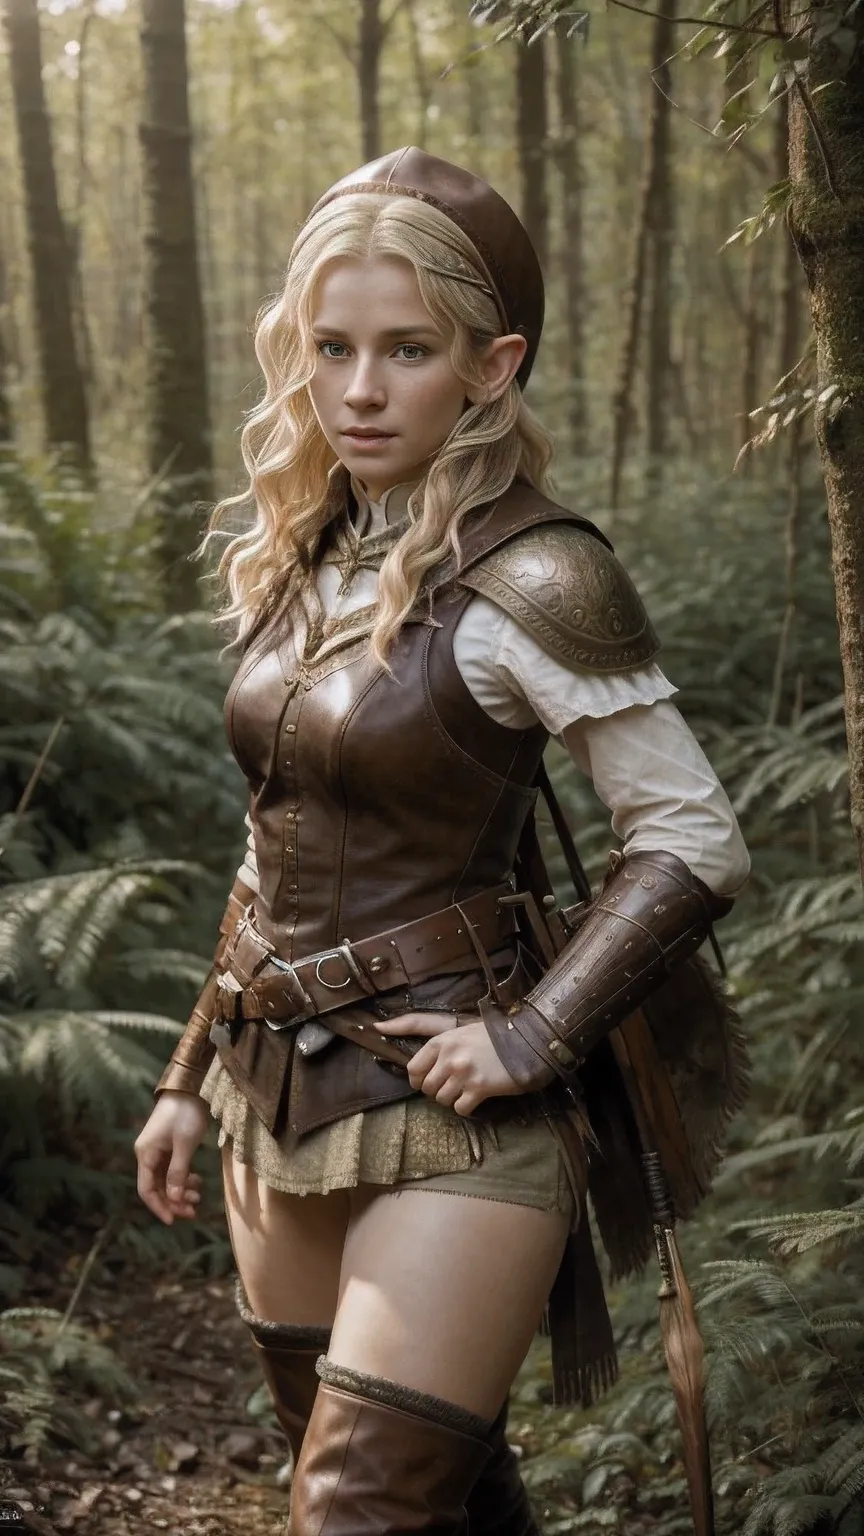 young elf girl : blonde wavy short hair,freckles on the face, on the head is a 16th century hunting hat with a feather on the si...